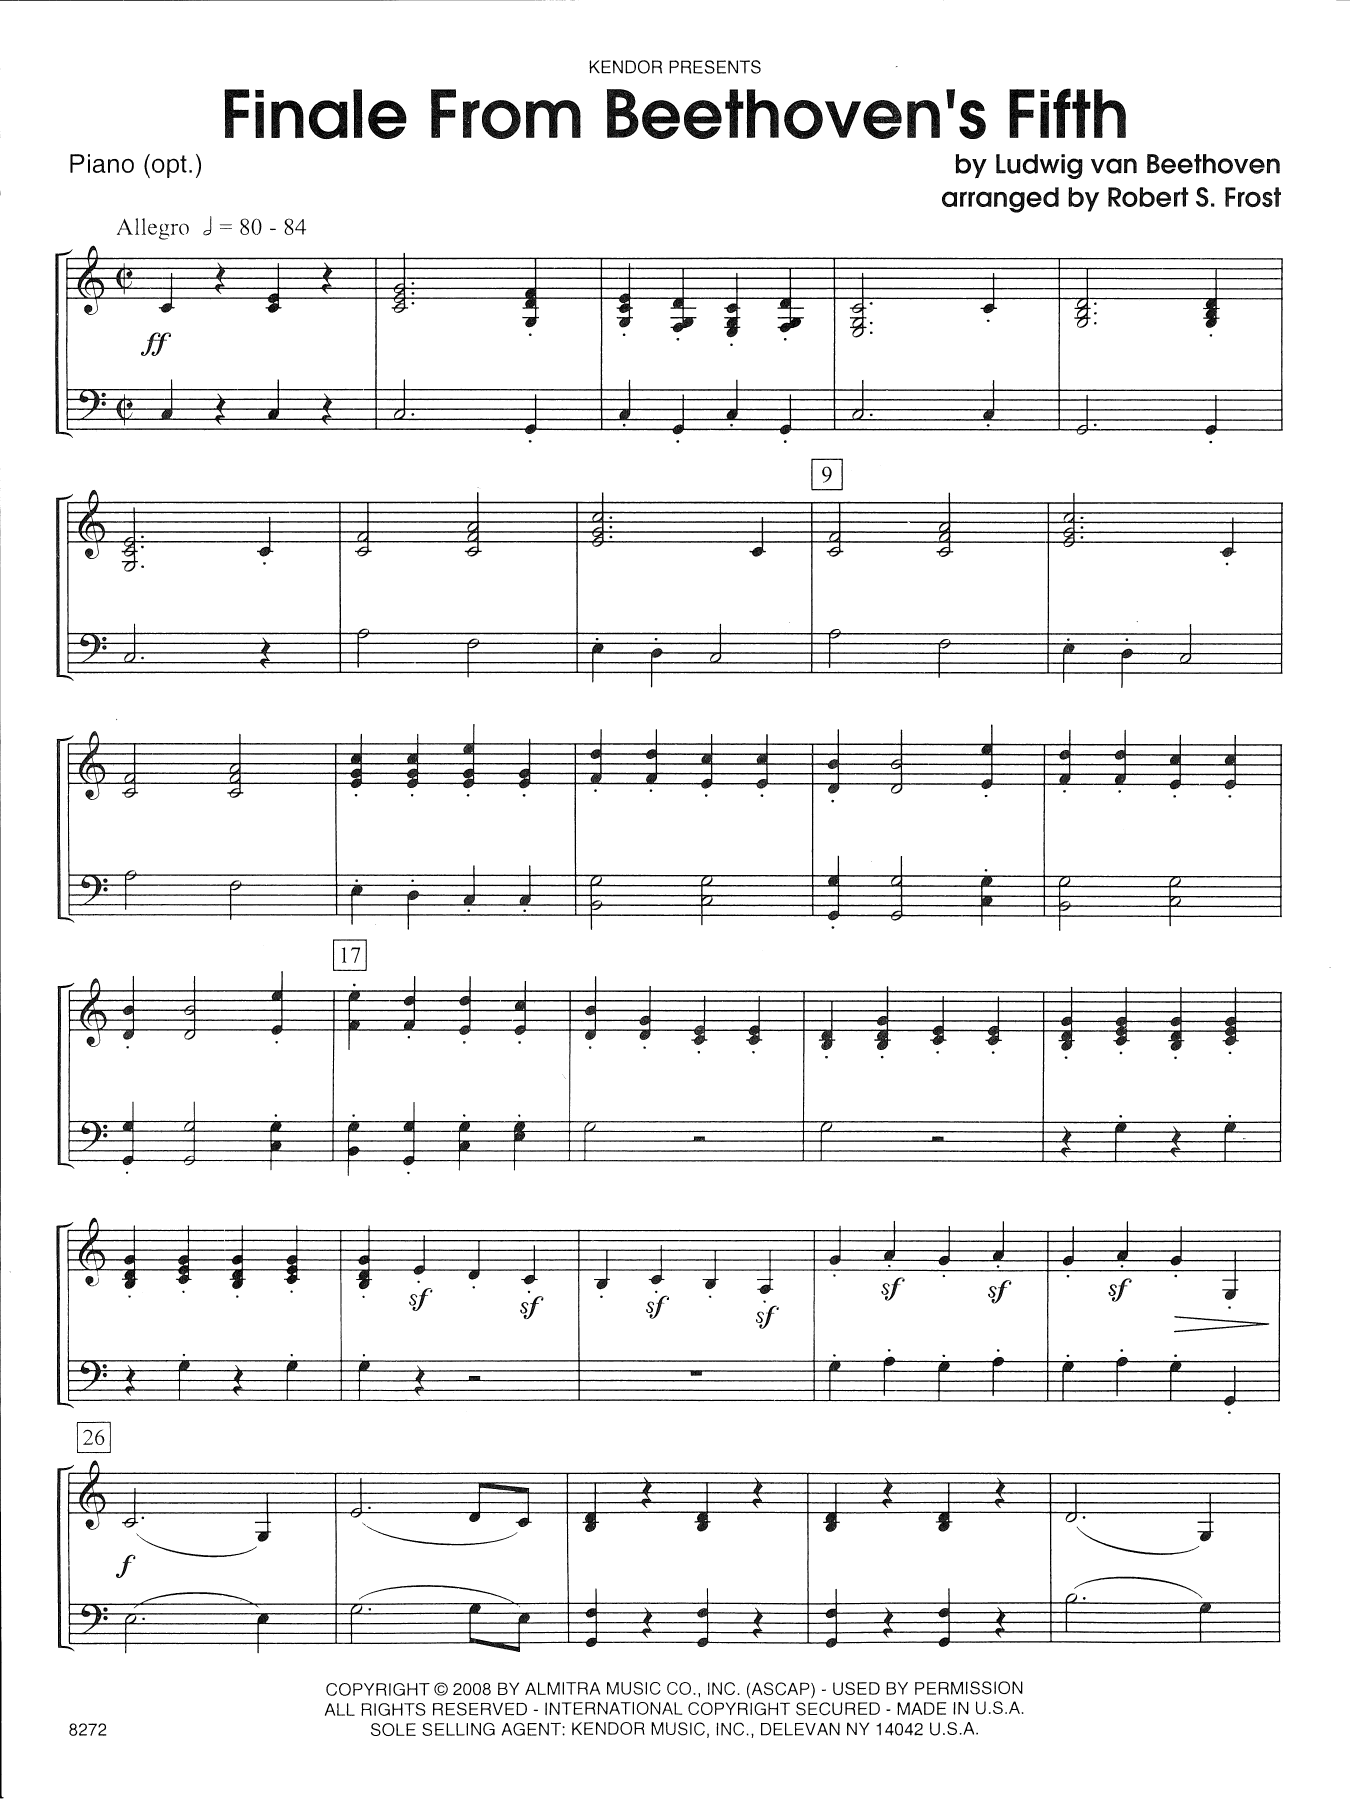 Download Ludwig van Beethoven Finale From Beethoven's Fifth - Piano A Sheet Music